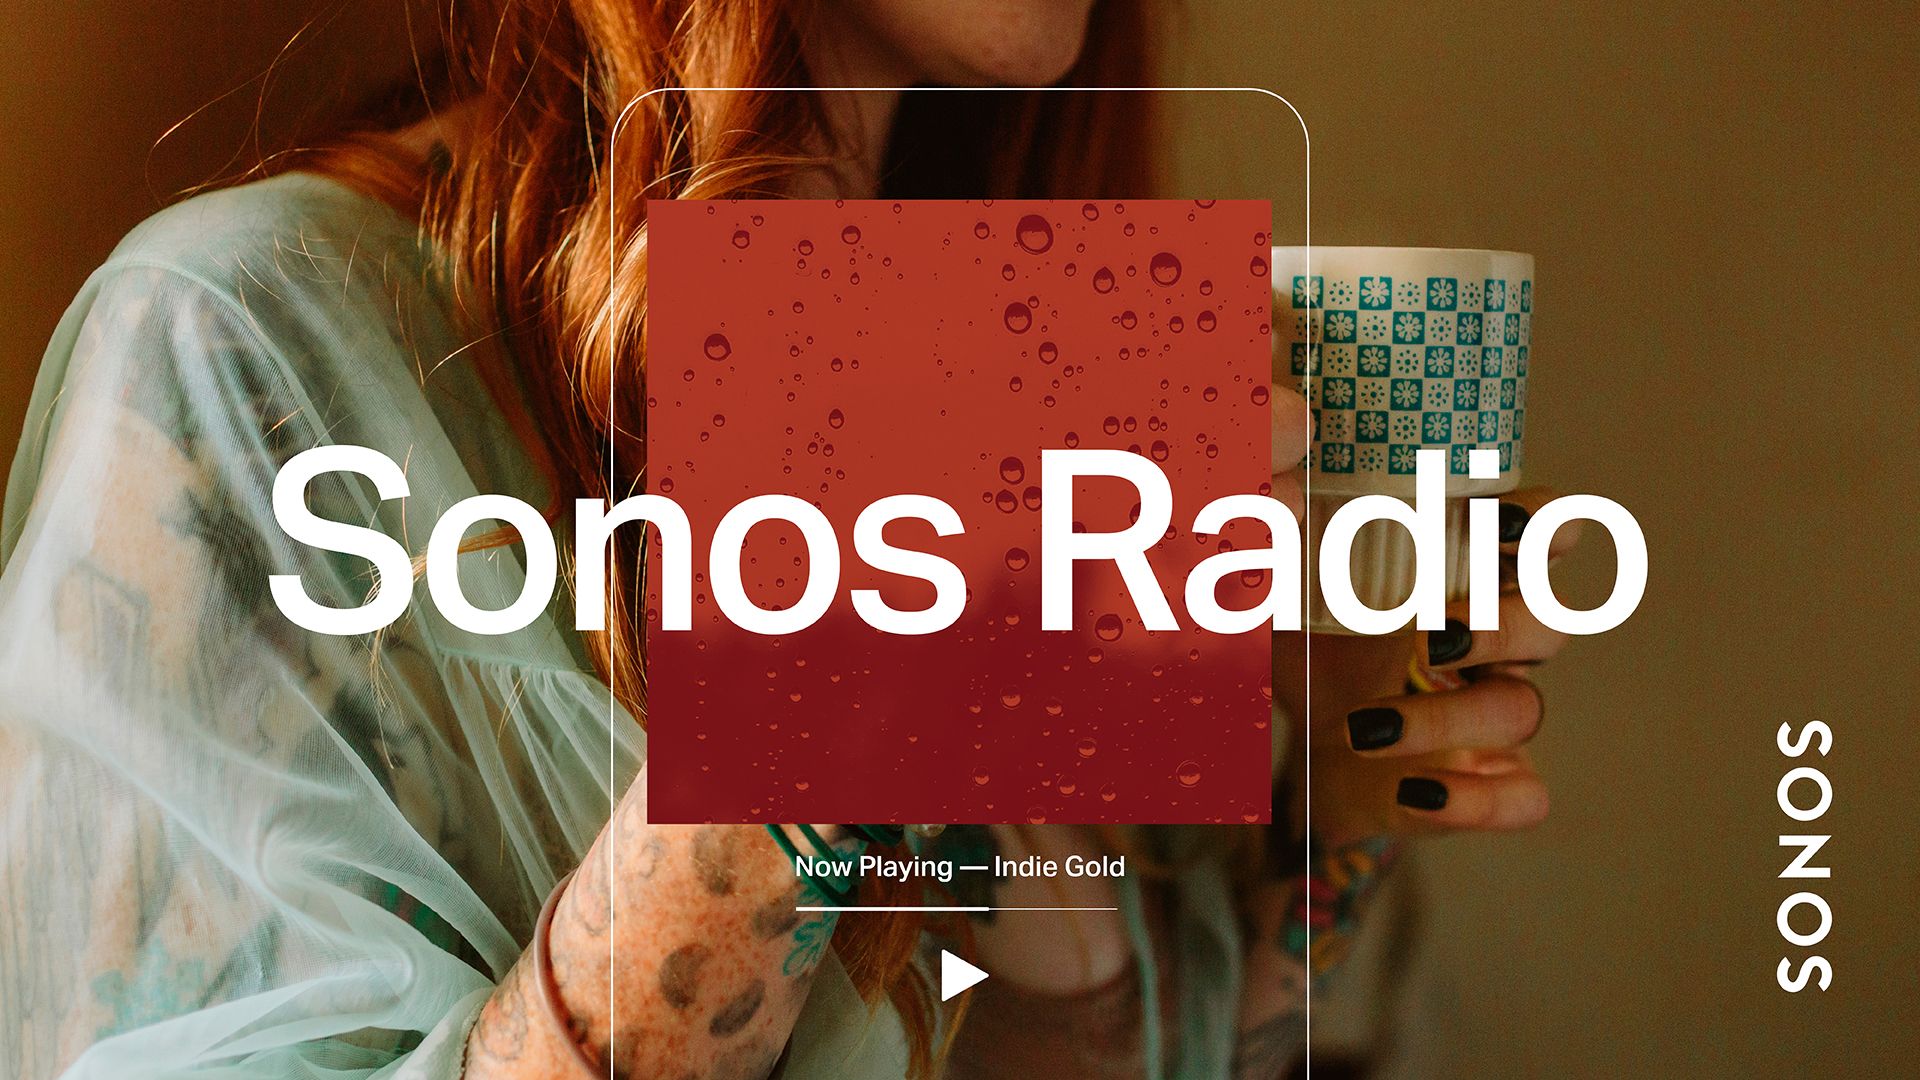 Sonos Radio Added To All Speakers Free Service With Curated Stations image 1